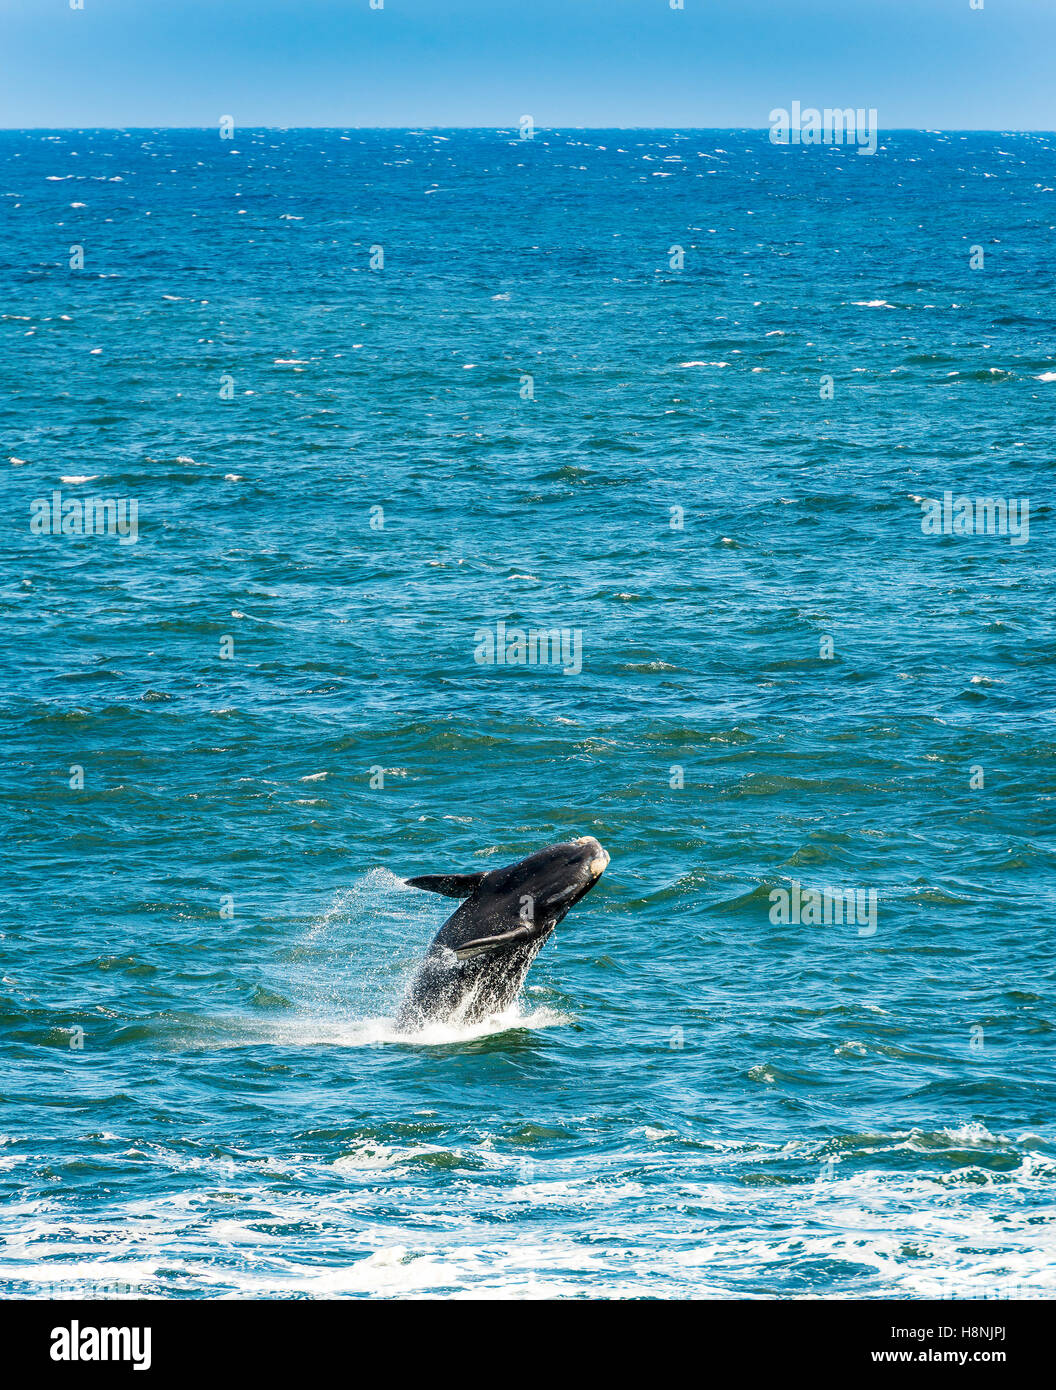 Southern Right Whale jumping out of water Stock Photo